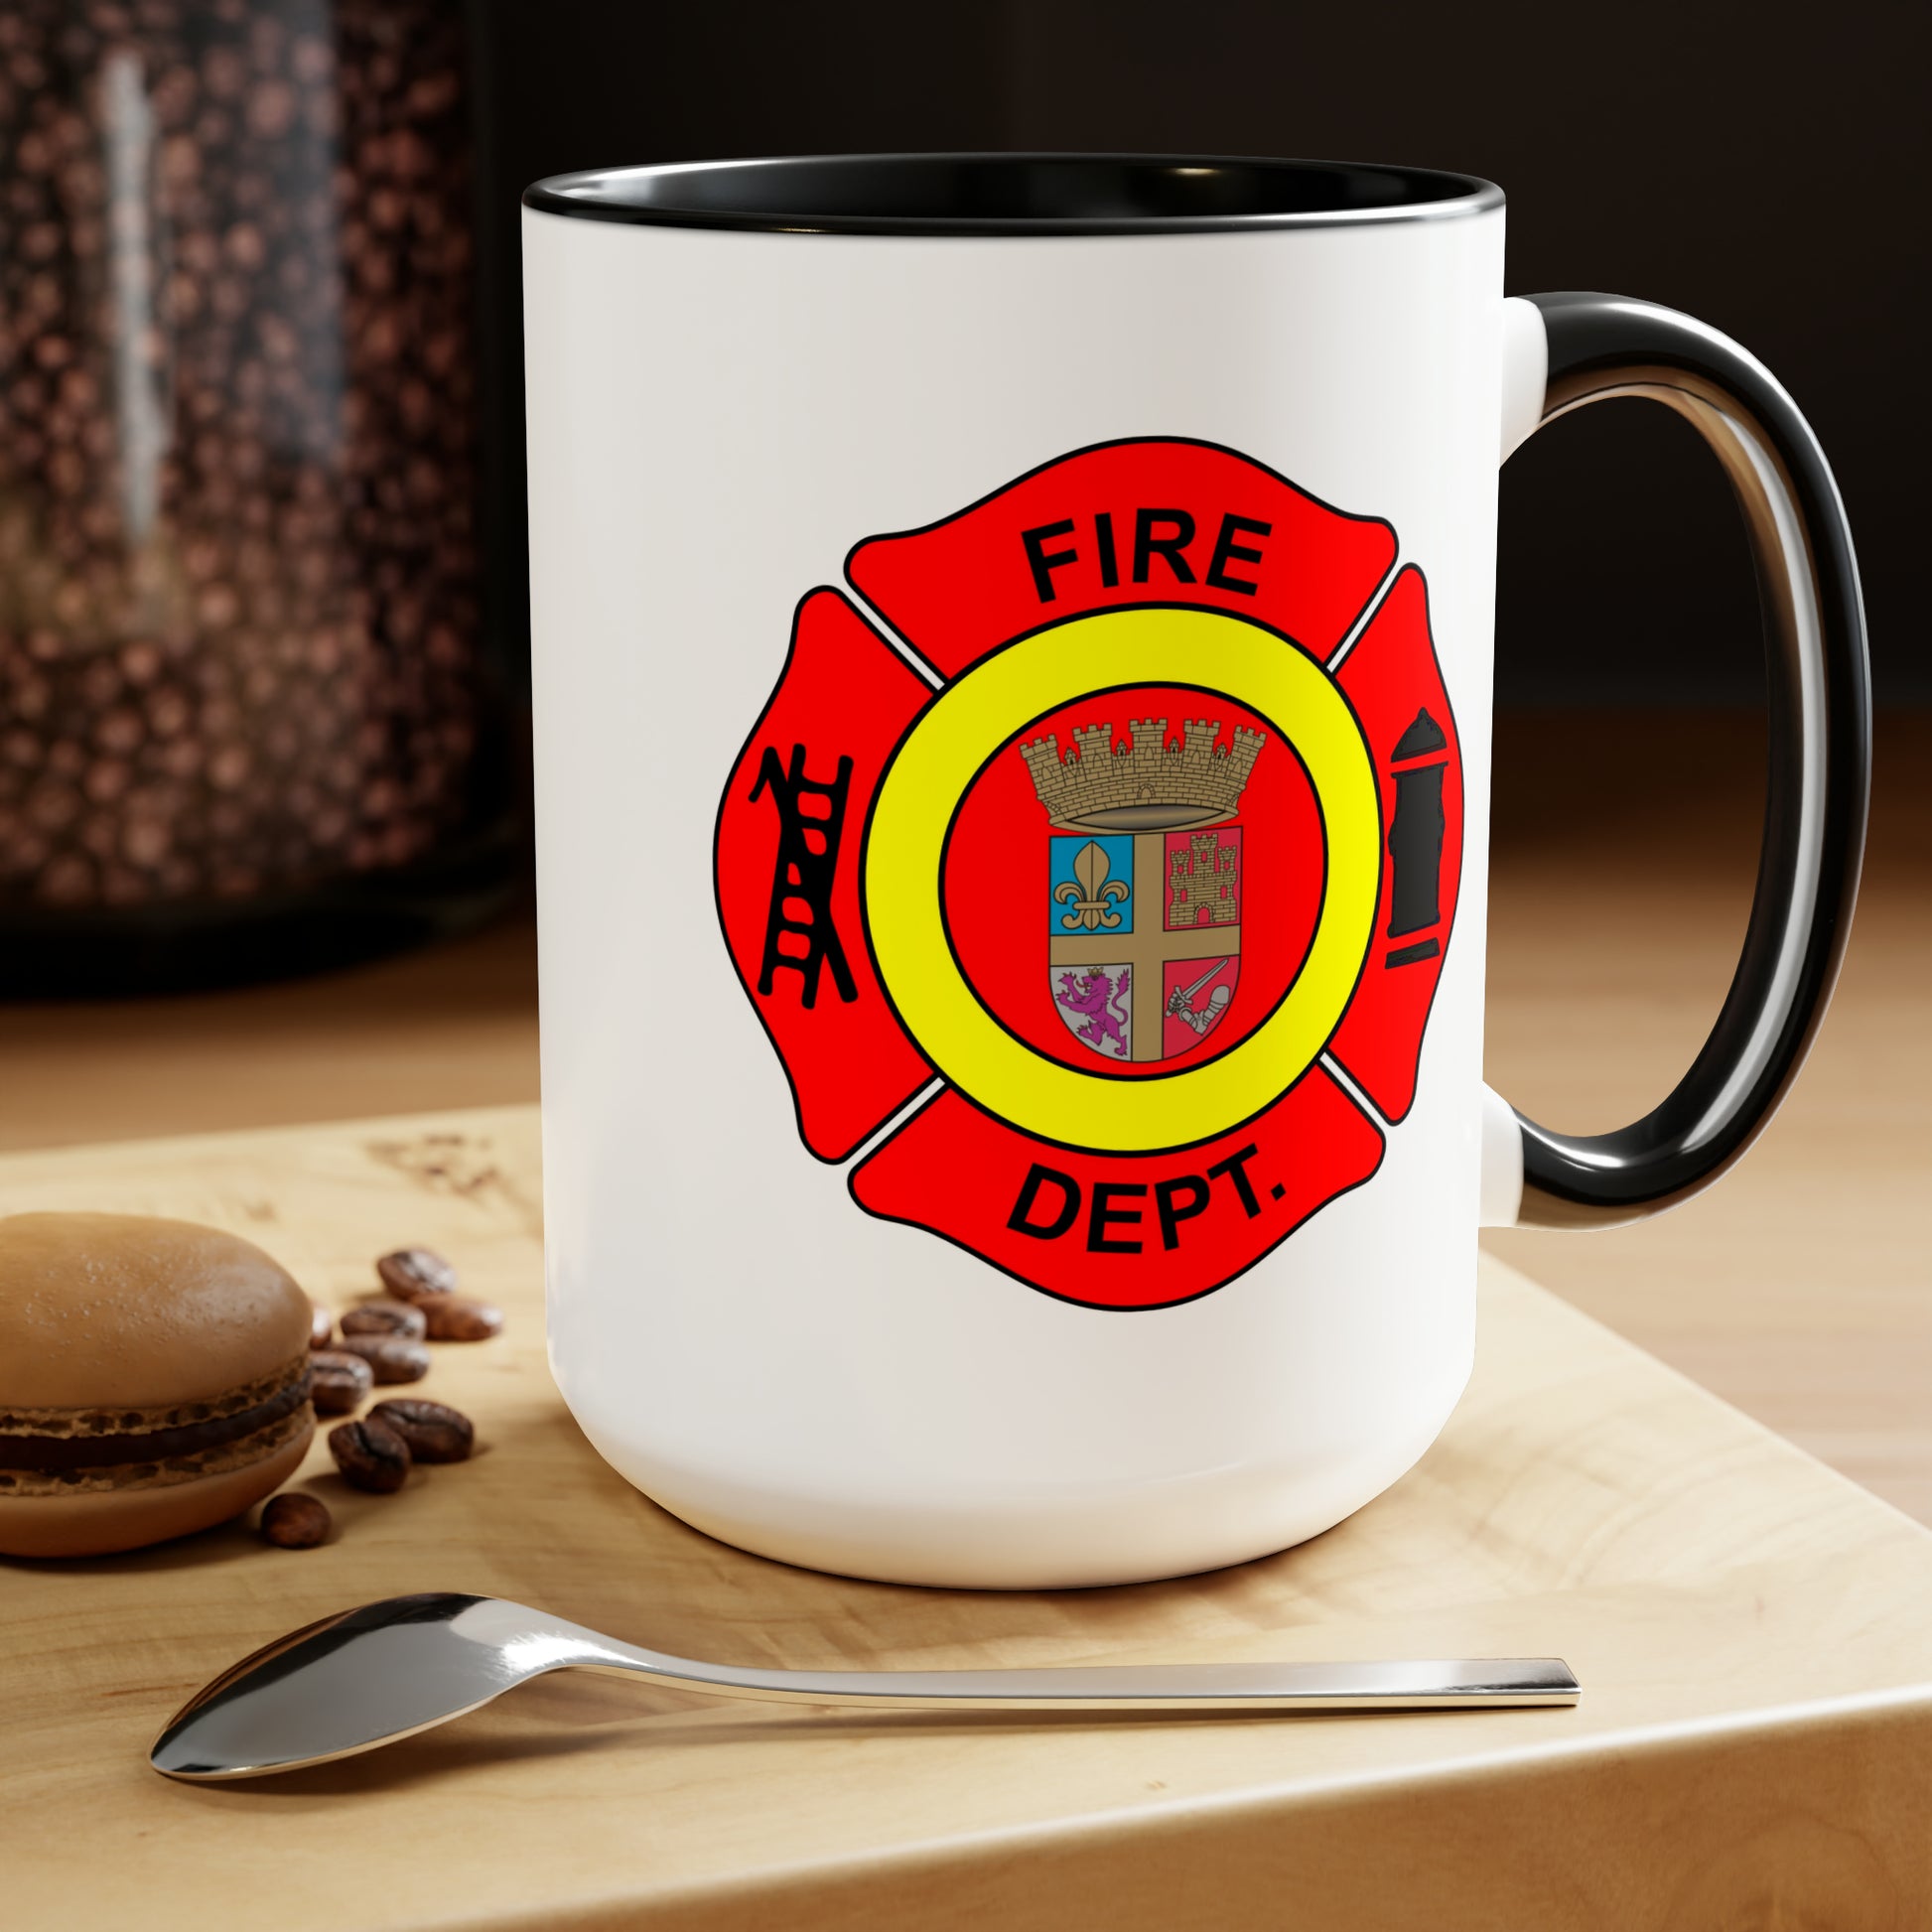 St Augustine Fire Department Coffee Mug - Double Sided Black Accent White Ceramic 15oz by TheGlassyLass.com